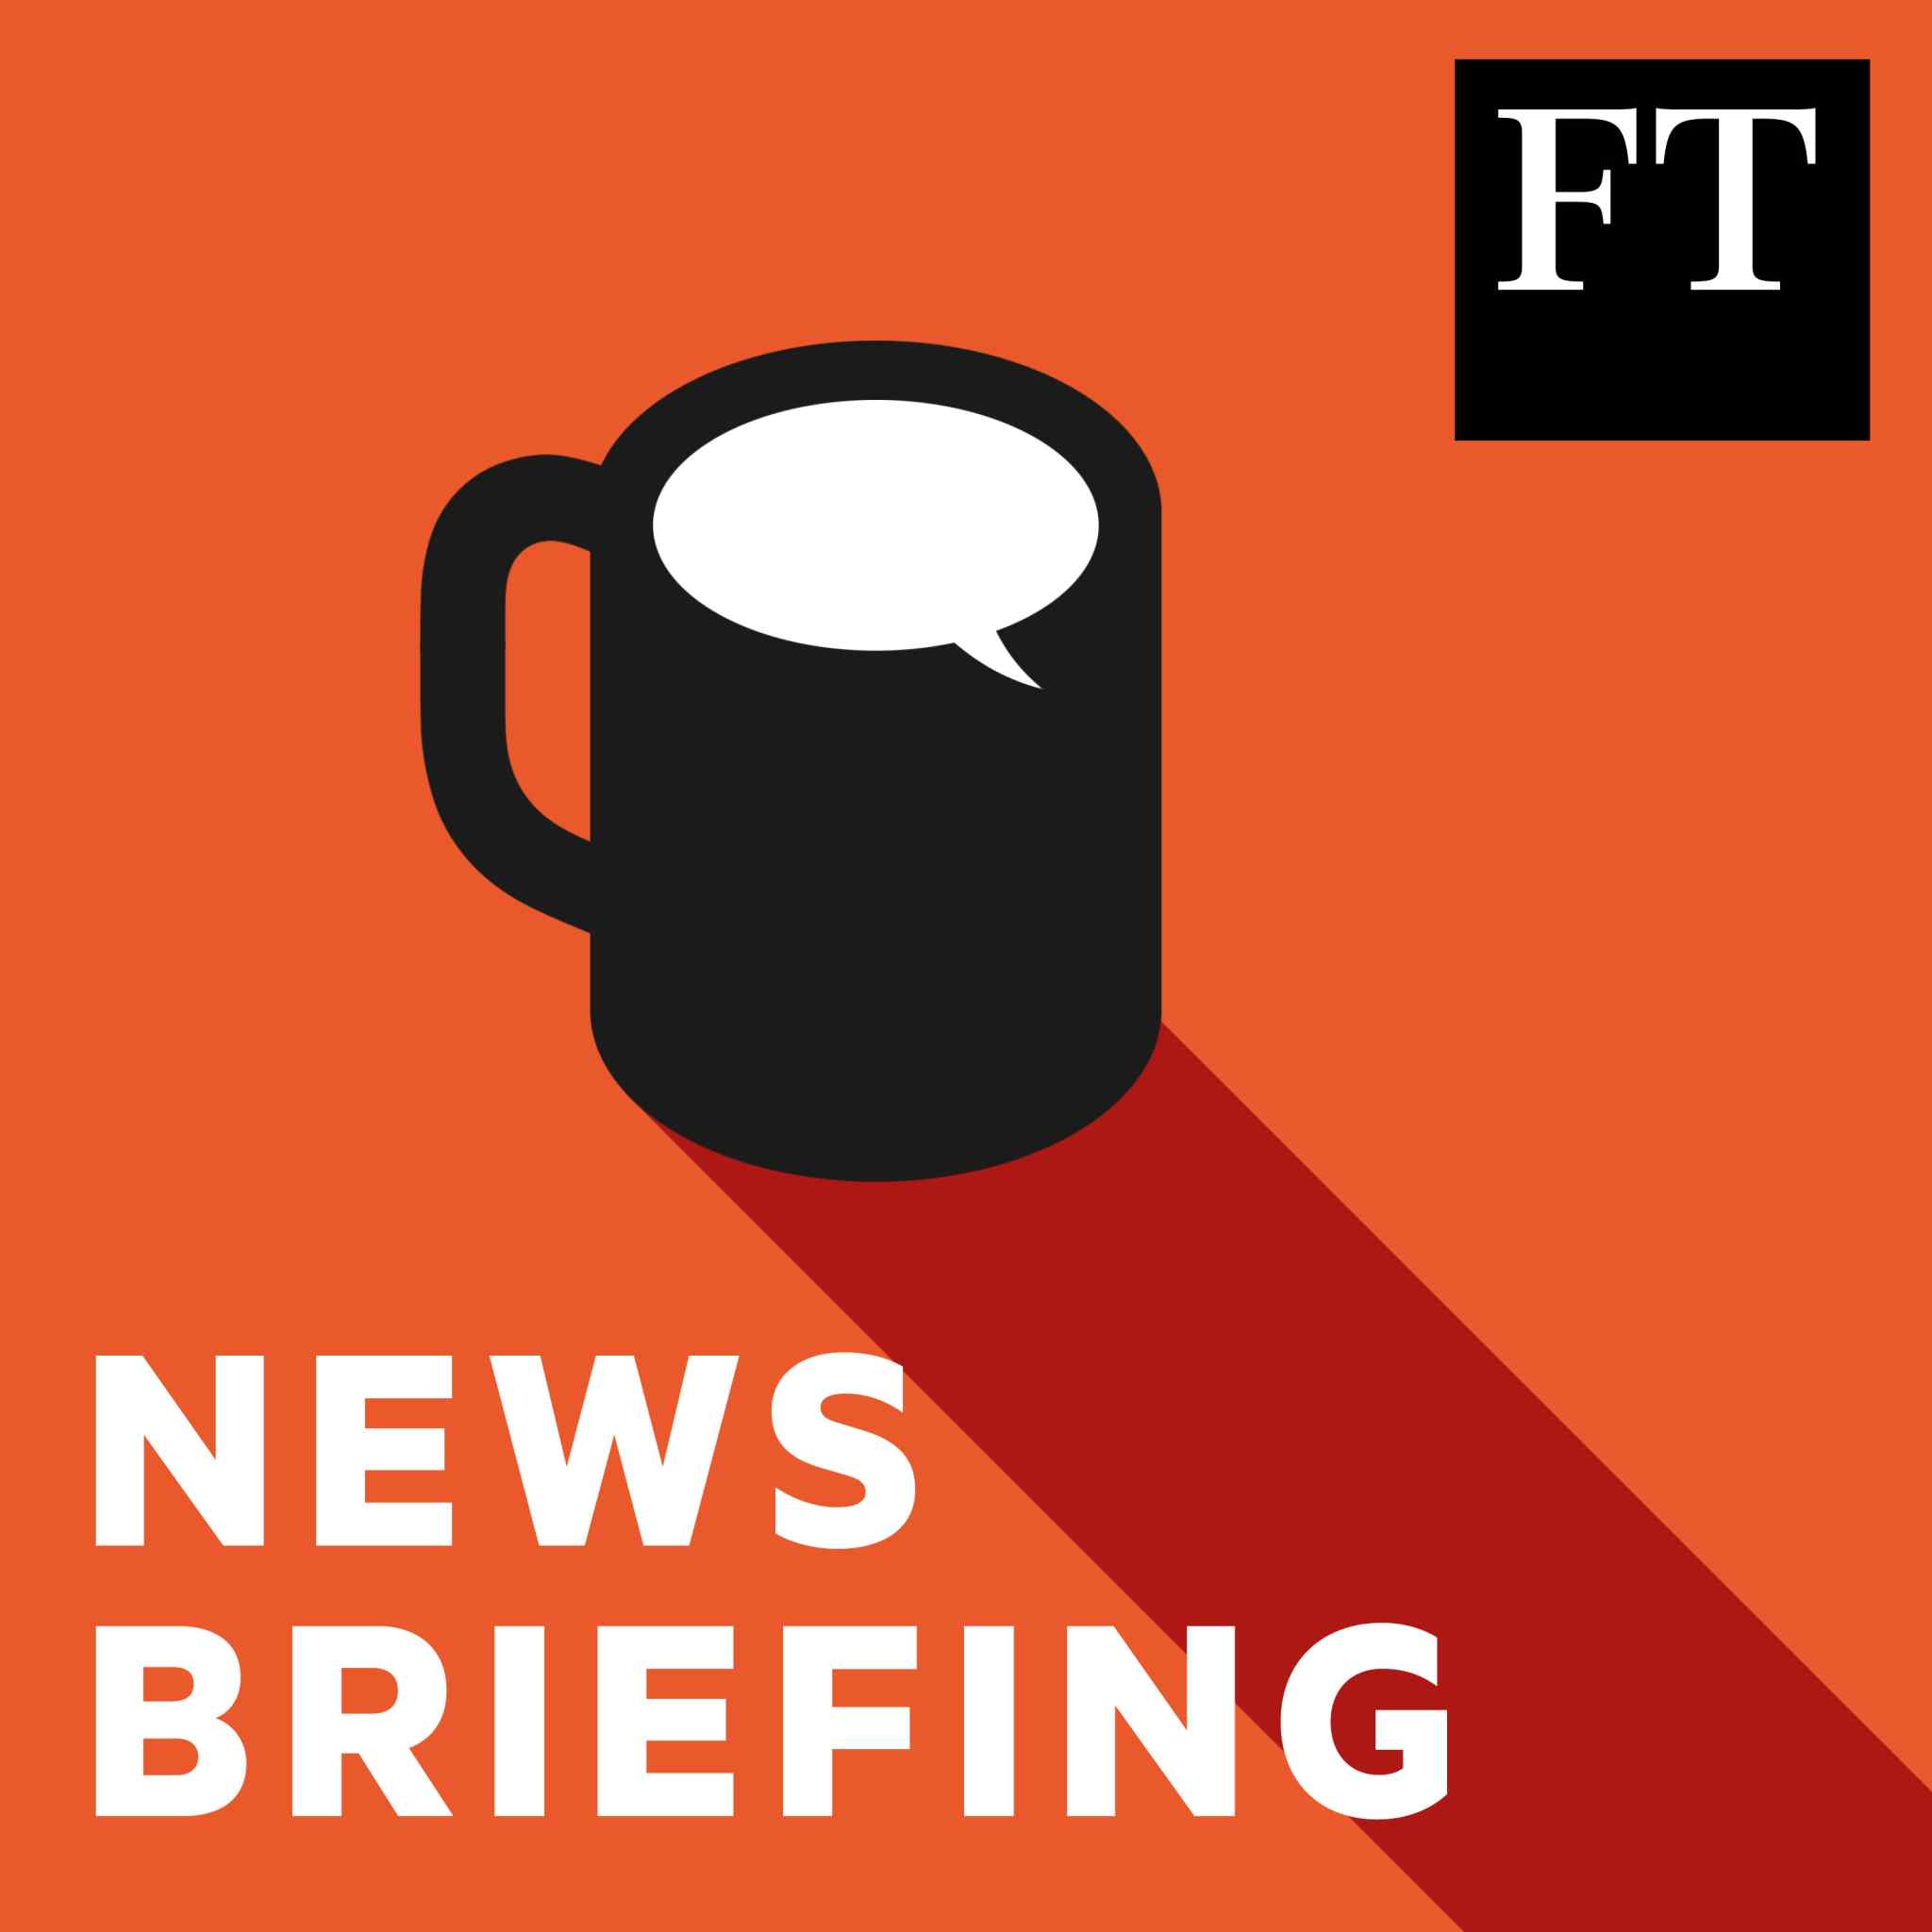 FT News Briefing podcast